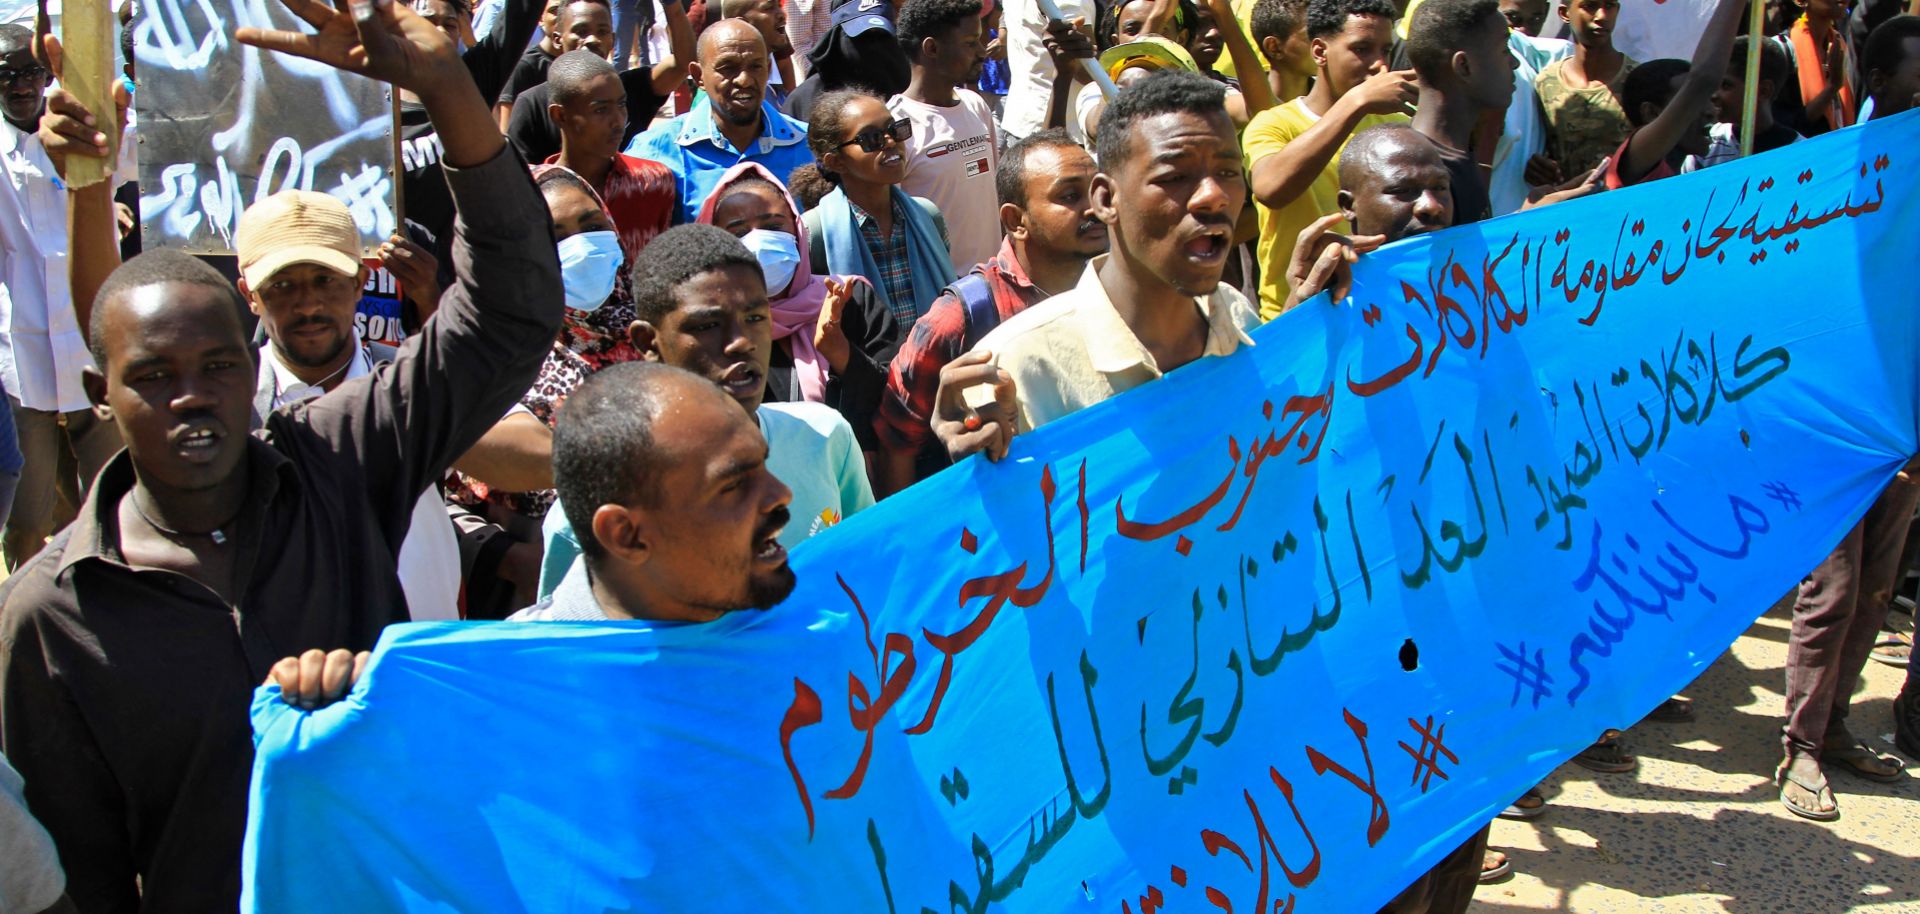 Demonstrators march in a protest in the area south of Sudan's capital Khartoum on Oct. 25, 2022, on the first anniversary of the military coup. 